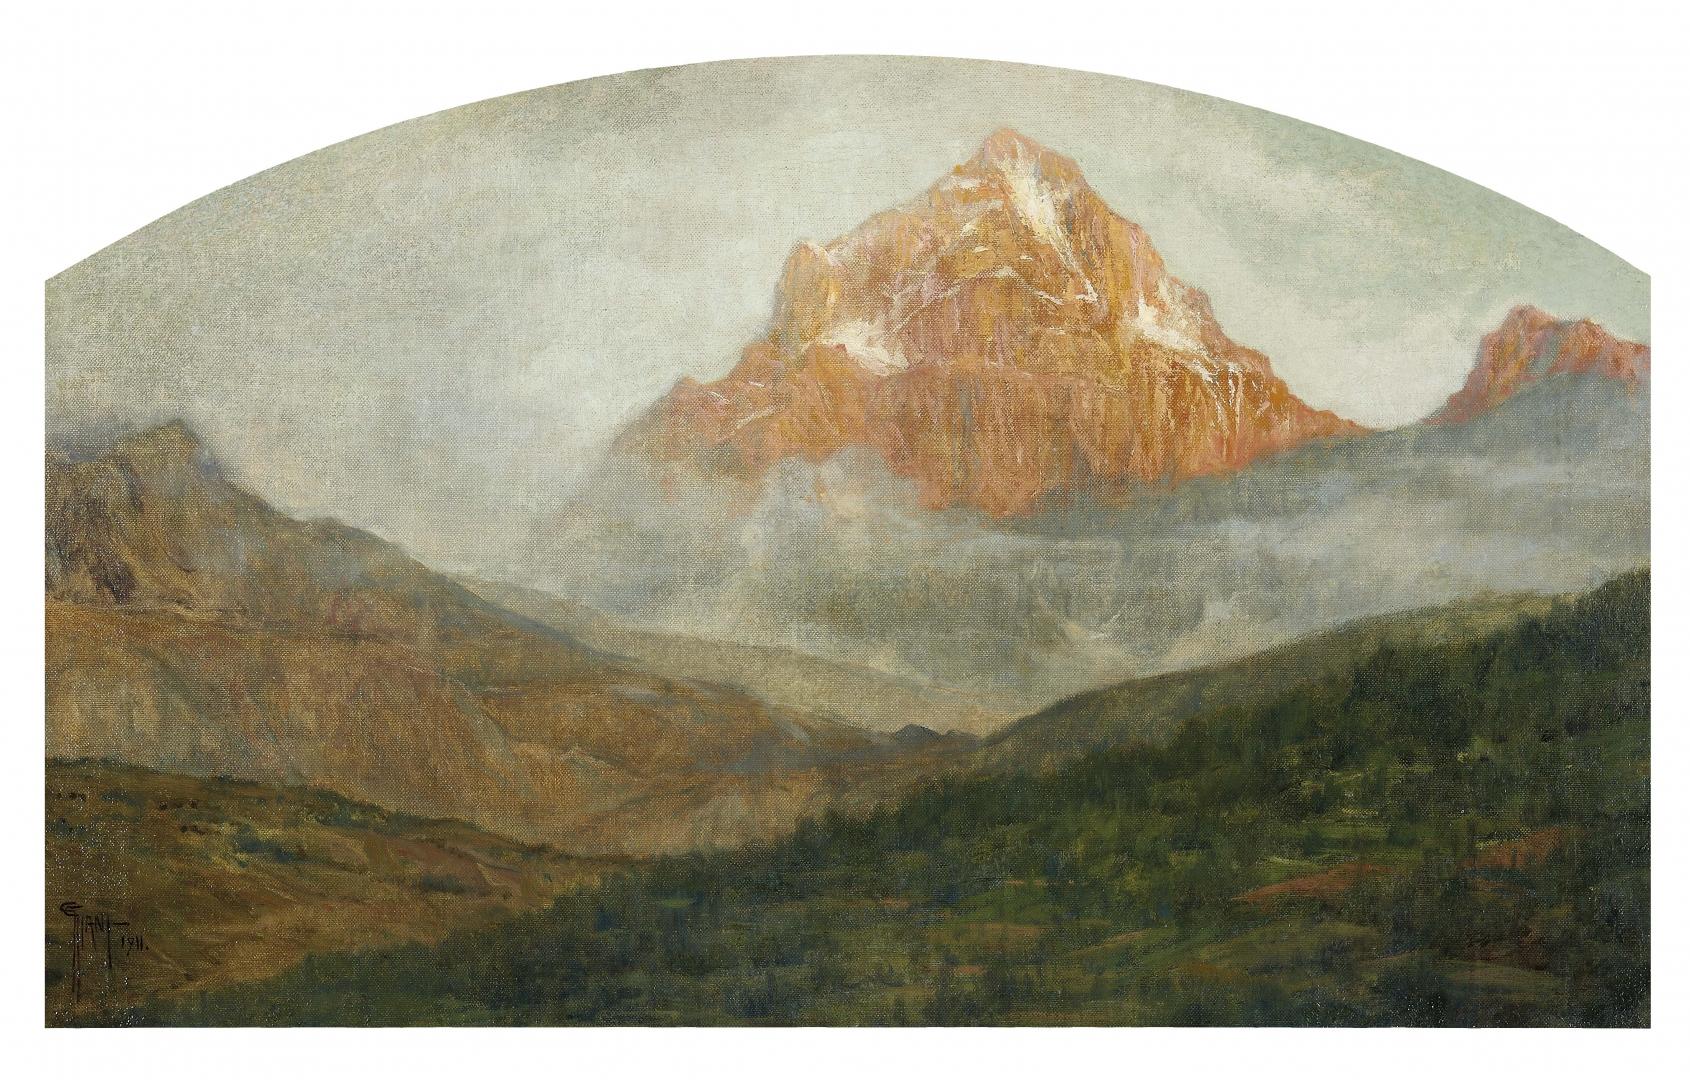 Giovanni Giani Landscape Painting - Mountain Landscape - Oil on Canvas by G. Giani - 1911